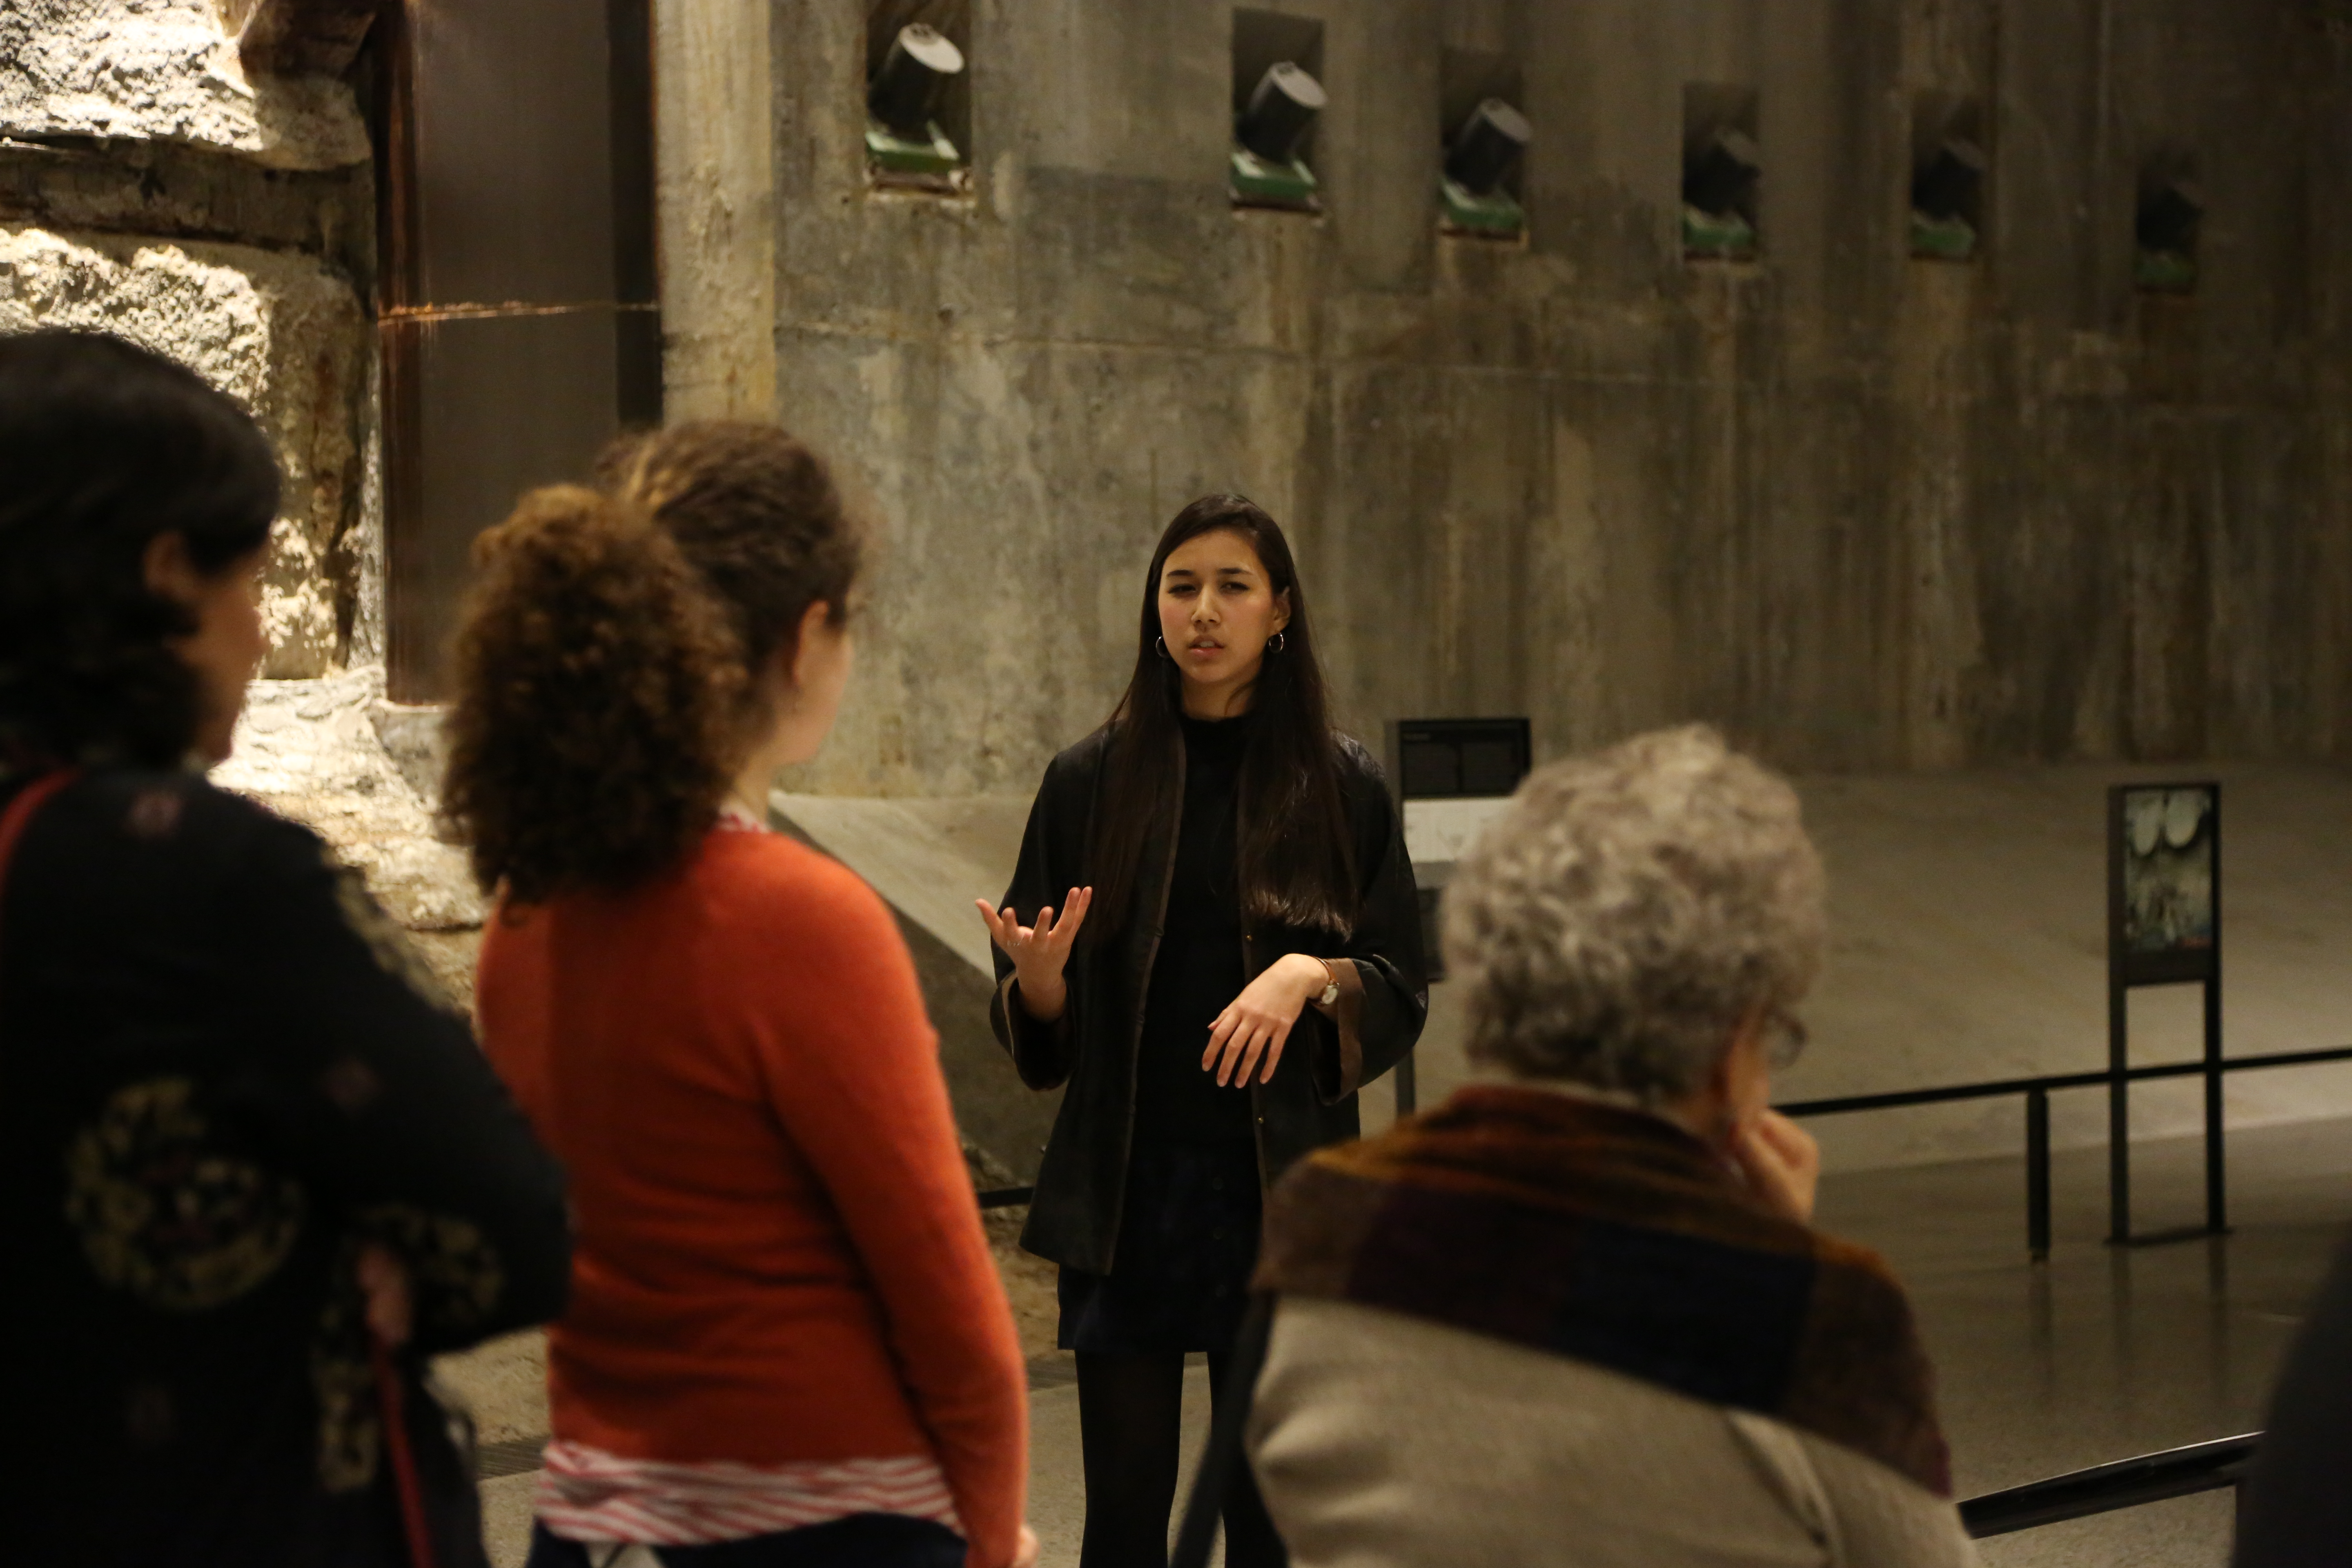 9/11 Memorial Museum ambassador Annalee Tai leads a Museum tour beside the slurry wall. Three visitors are in the foreground listening to her.